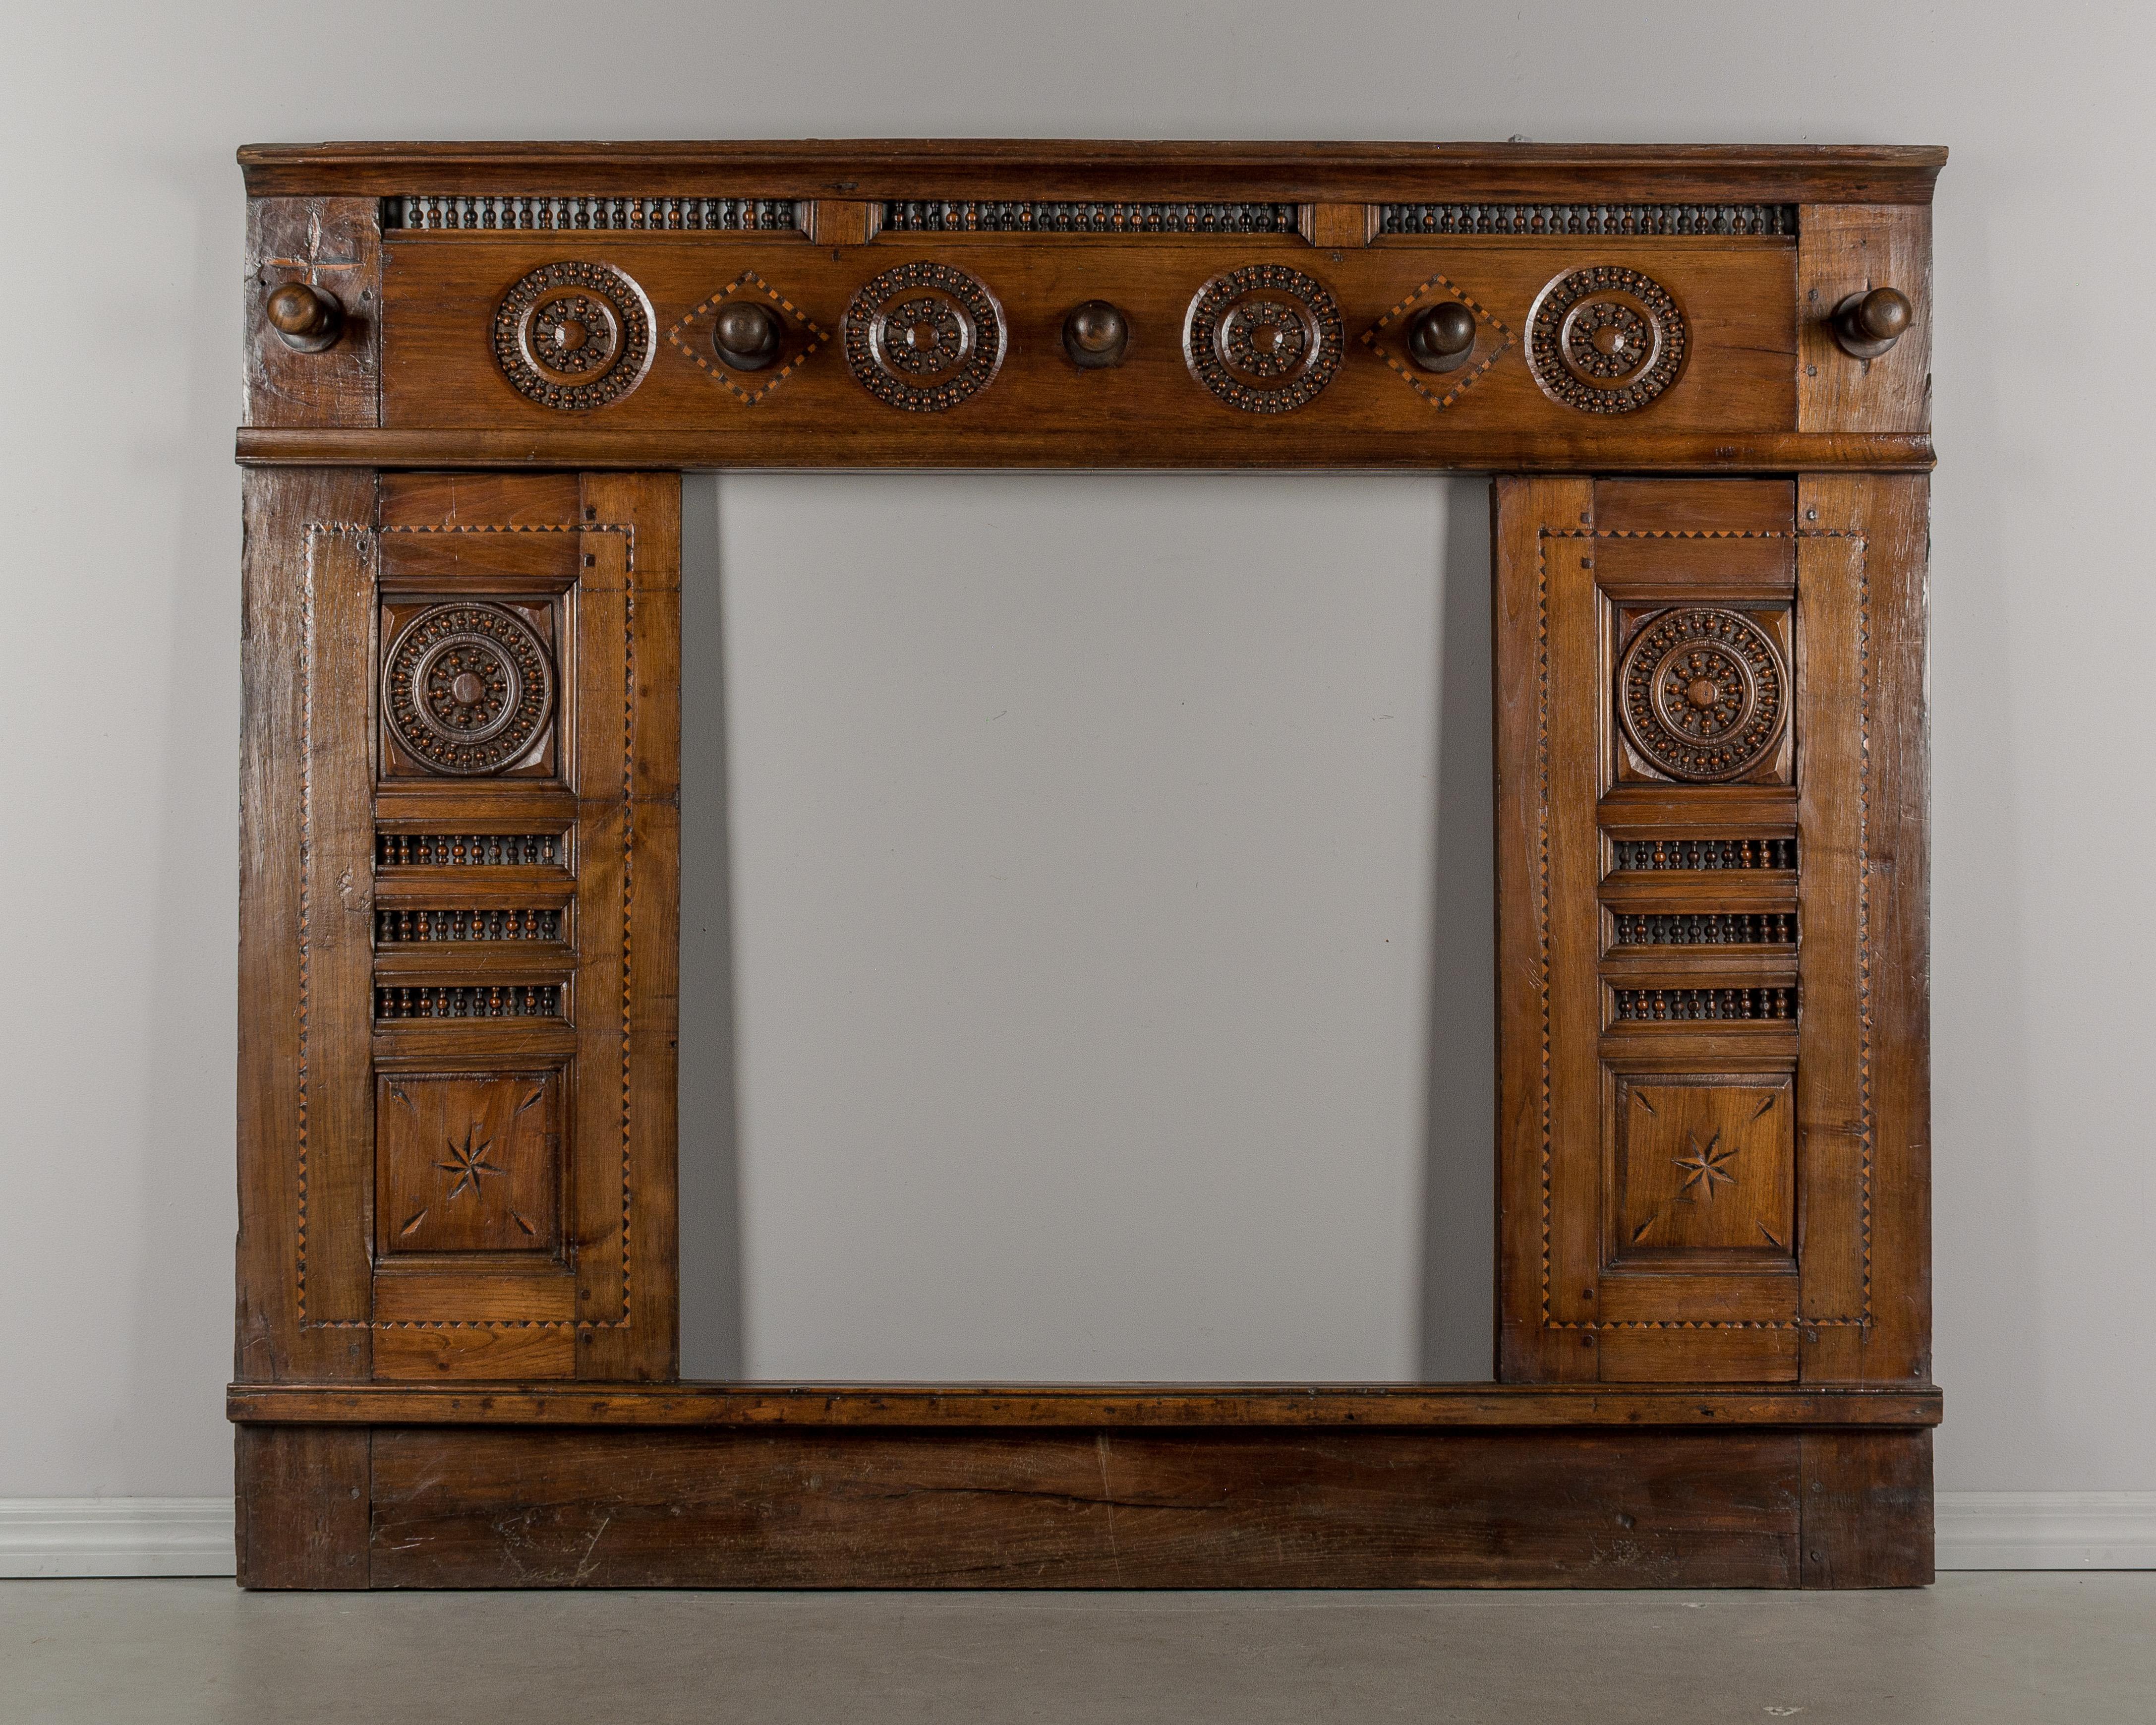 An early 19th century French hall tree made of chestnut. This was originally the front framework of a traditional Brittany lit clos (enclosed bed). The cabinet doors have been removed and five large pegs were added at the top to hang coats and hats.